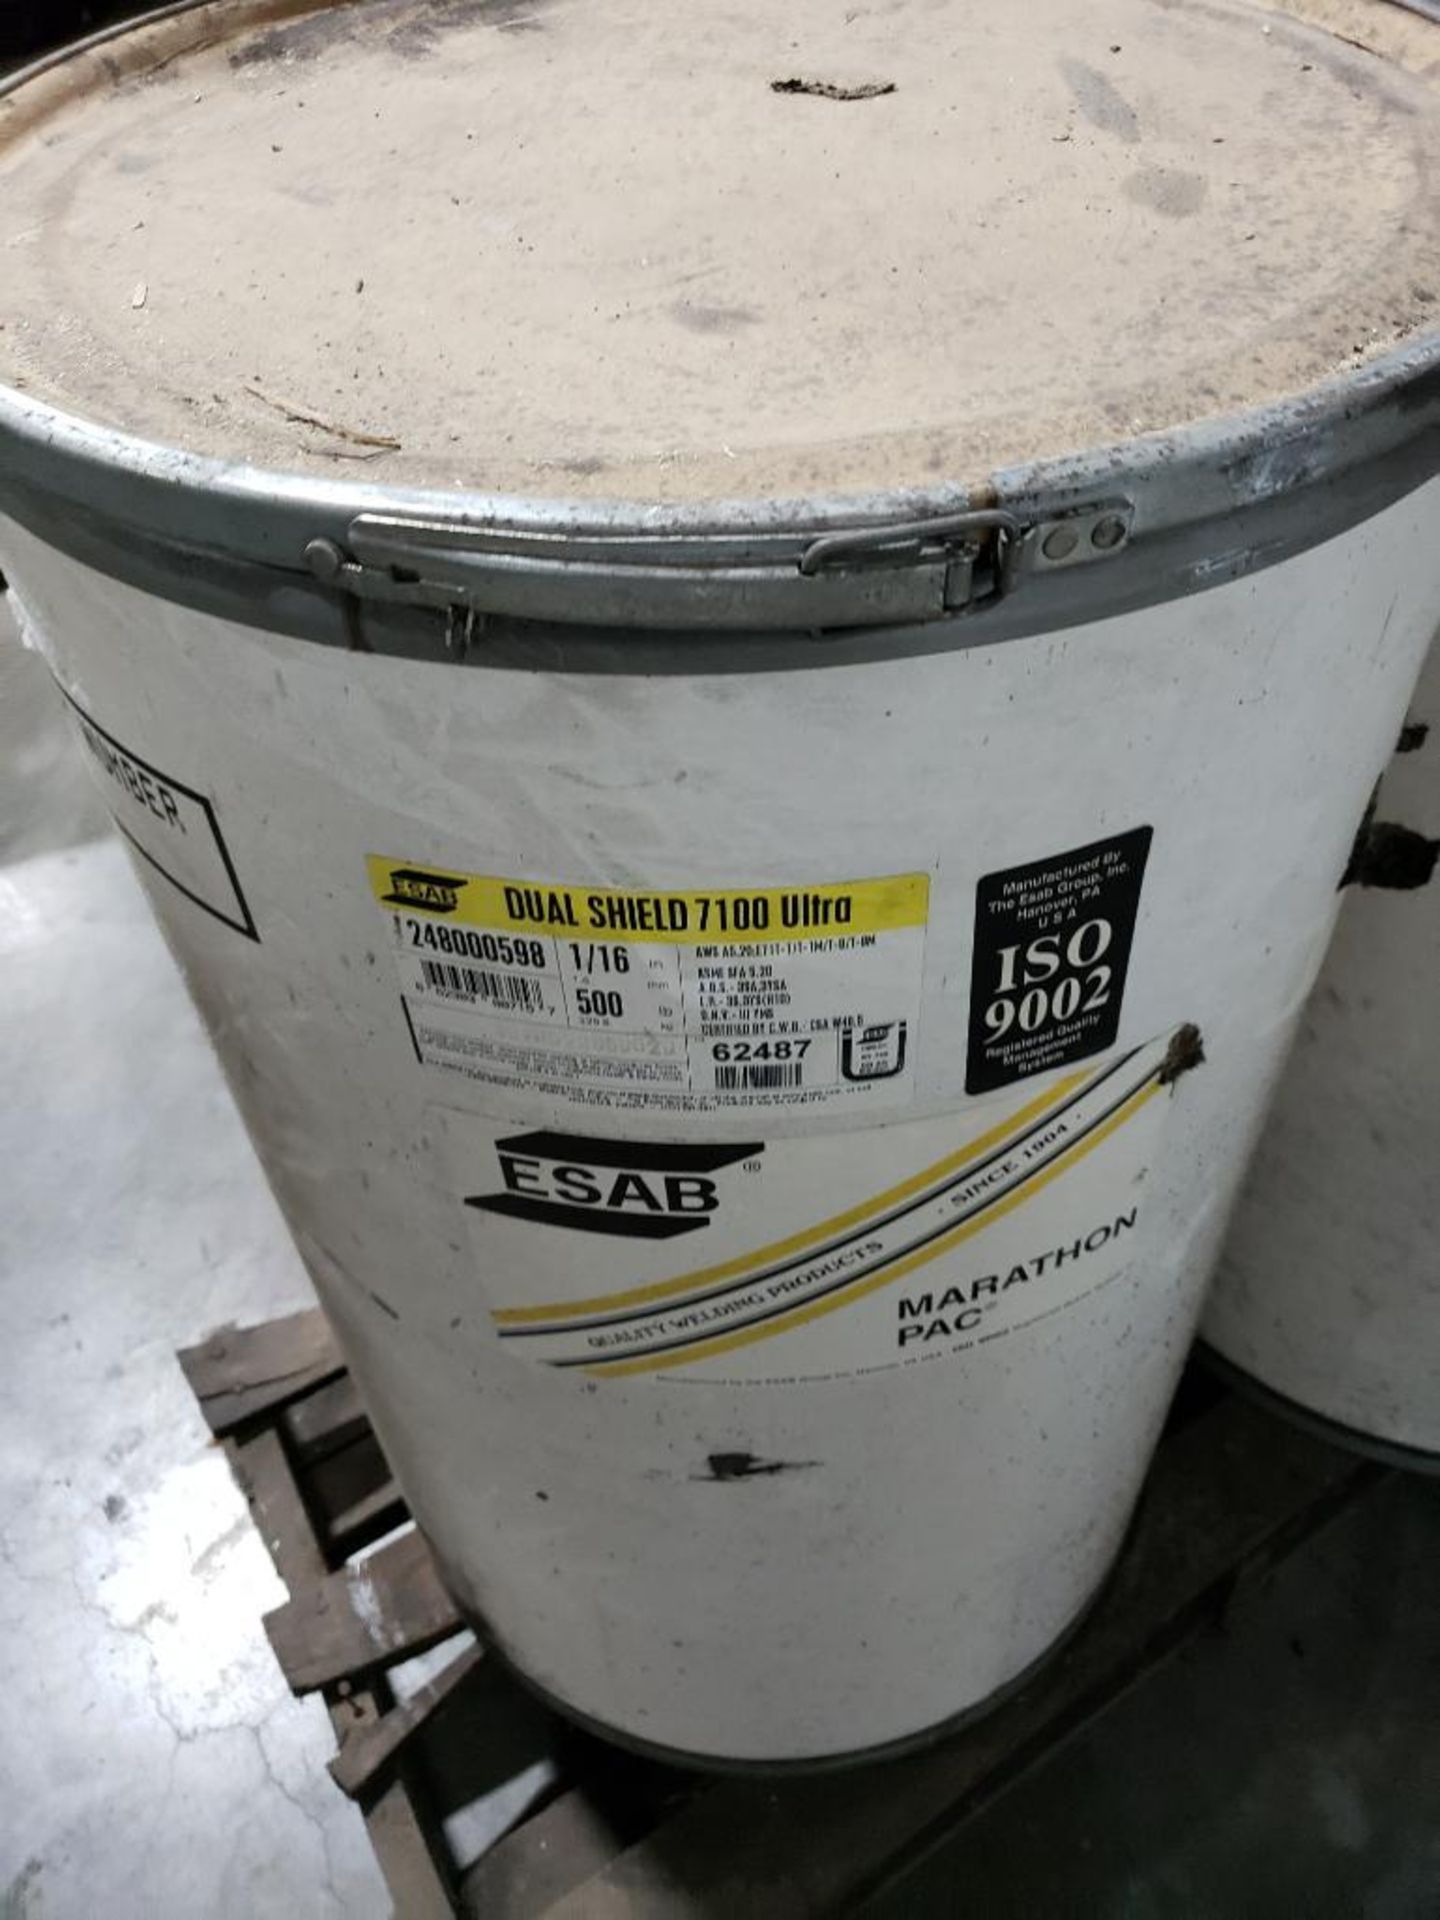 500lbs Esab dual shield 7100 Ultra welding wire. 1/16in. Part number 248000598. - Image 3 of 3